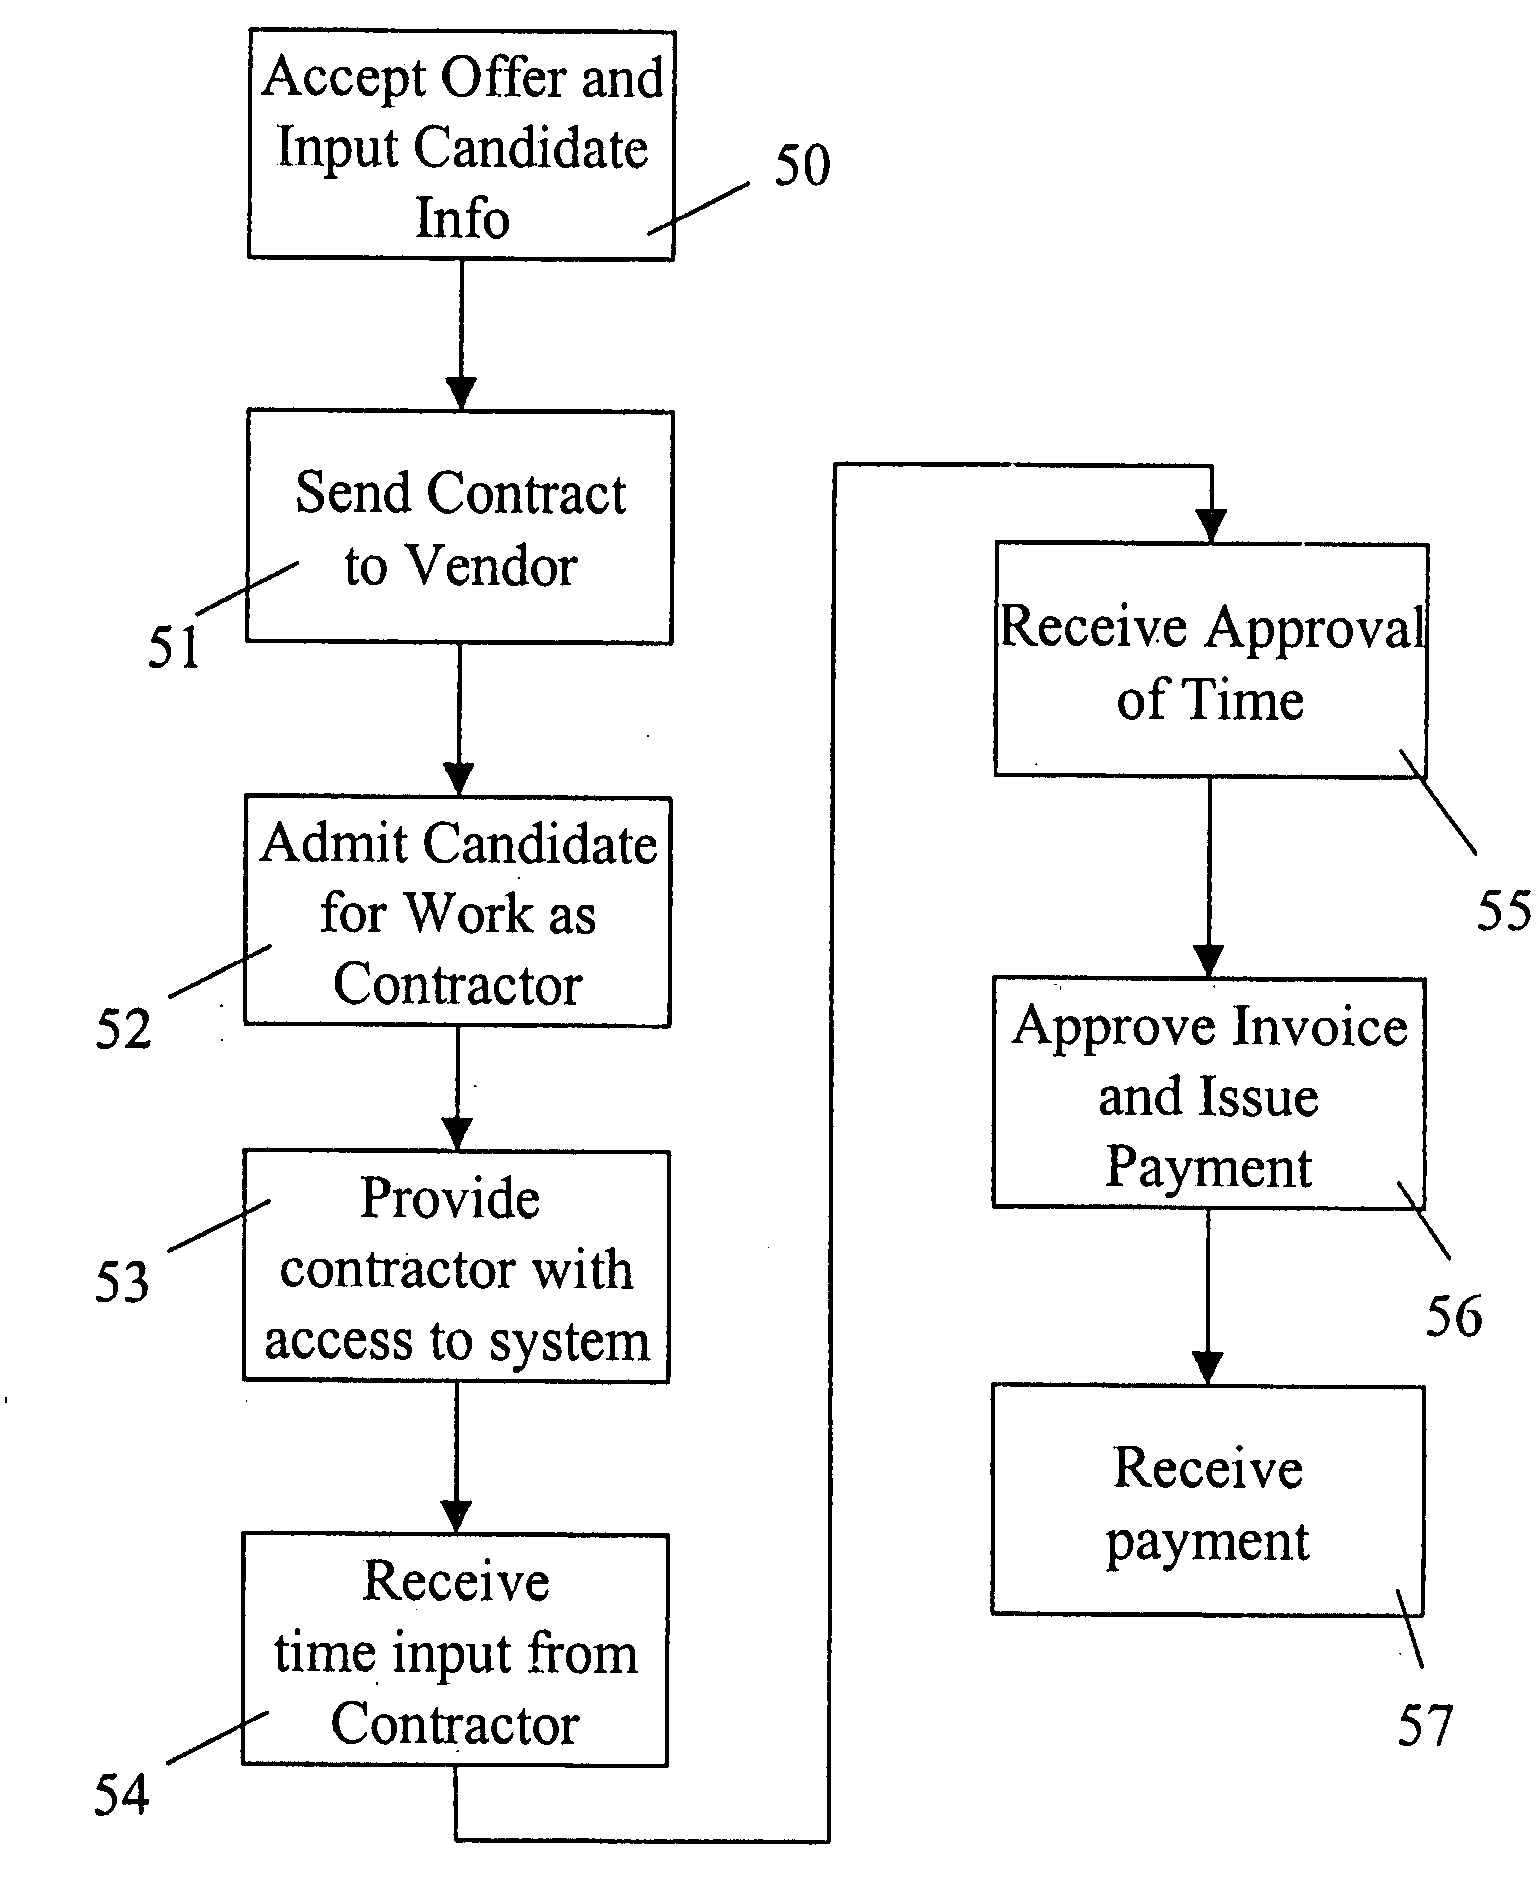 System and method for managing numerous facets of a work relationship